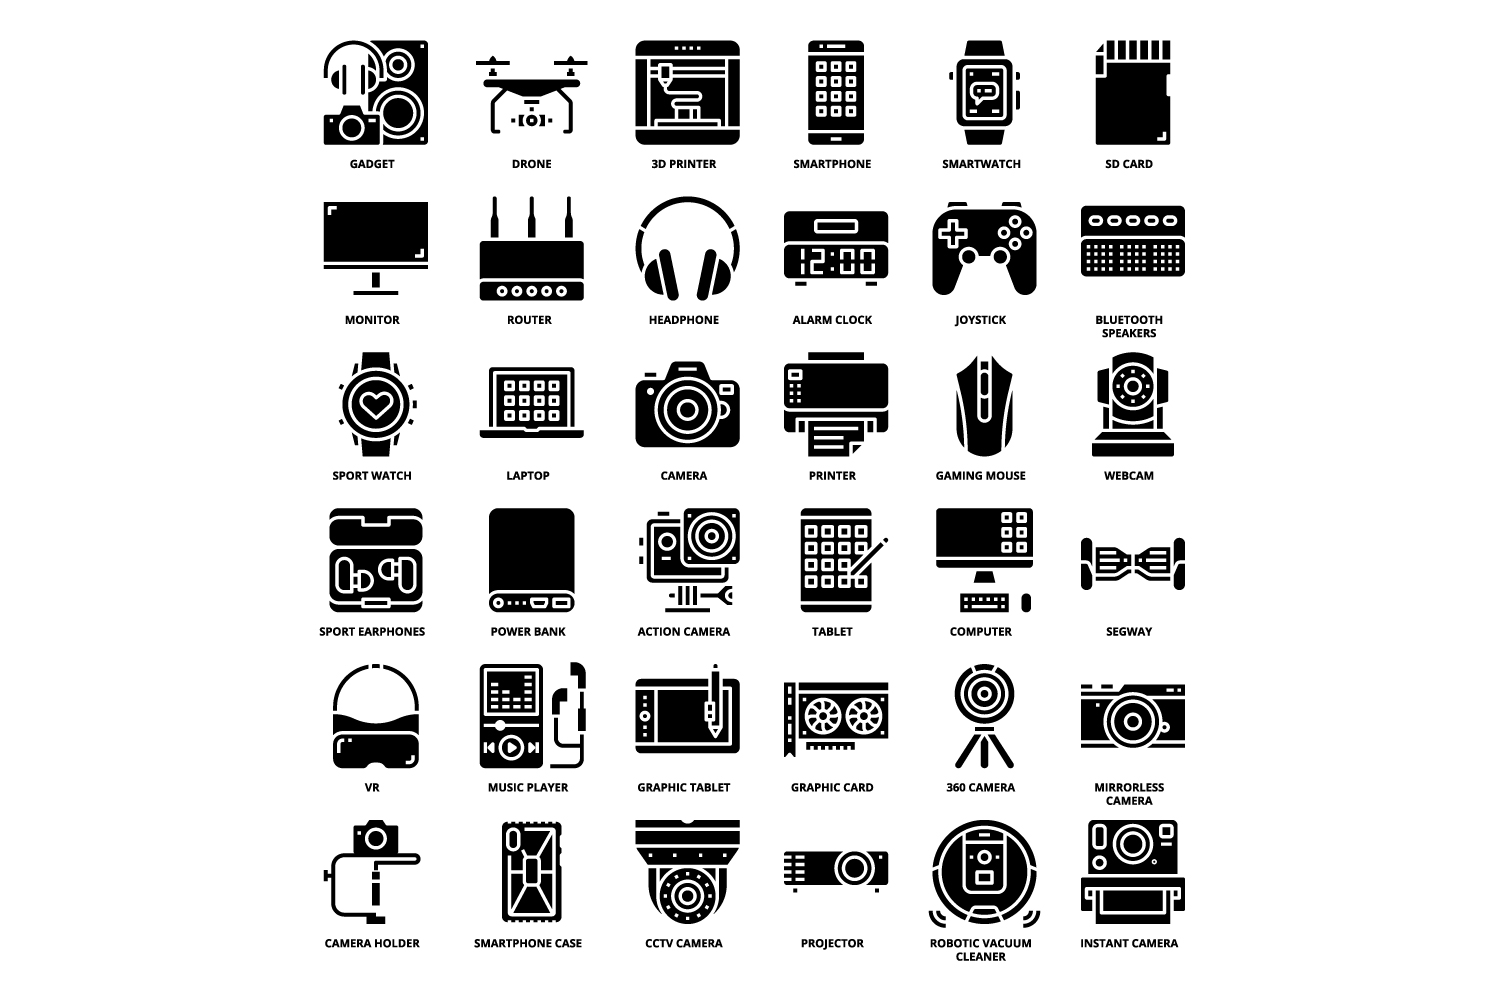 Black and white image of various electronics.